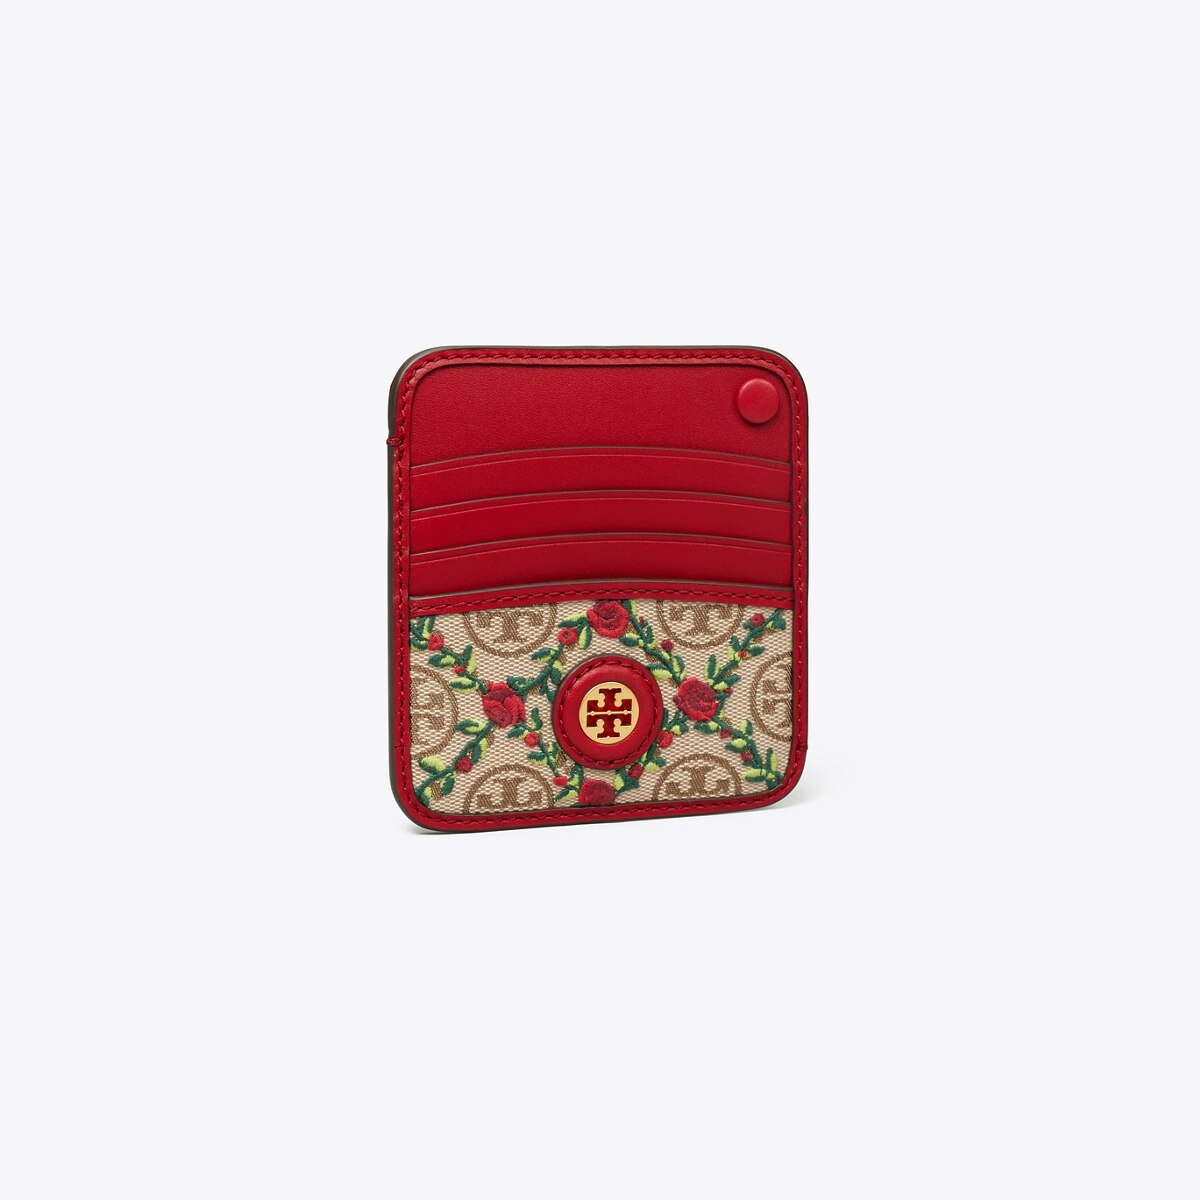 T Monogram Embroidered Card Case